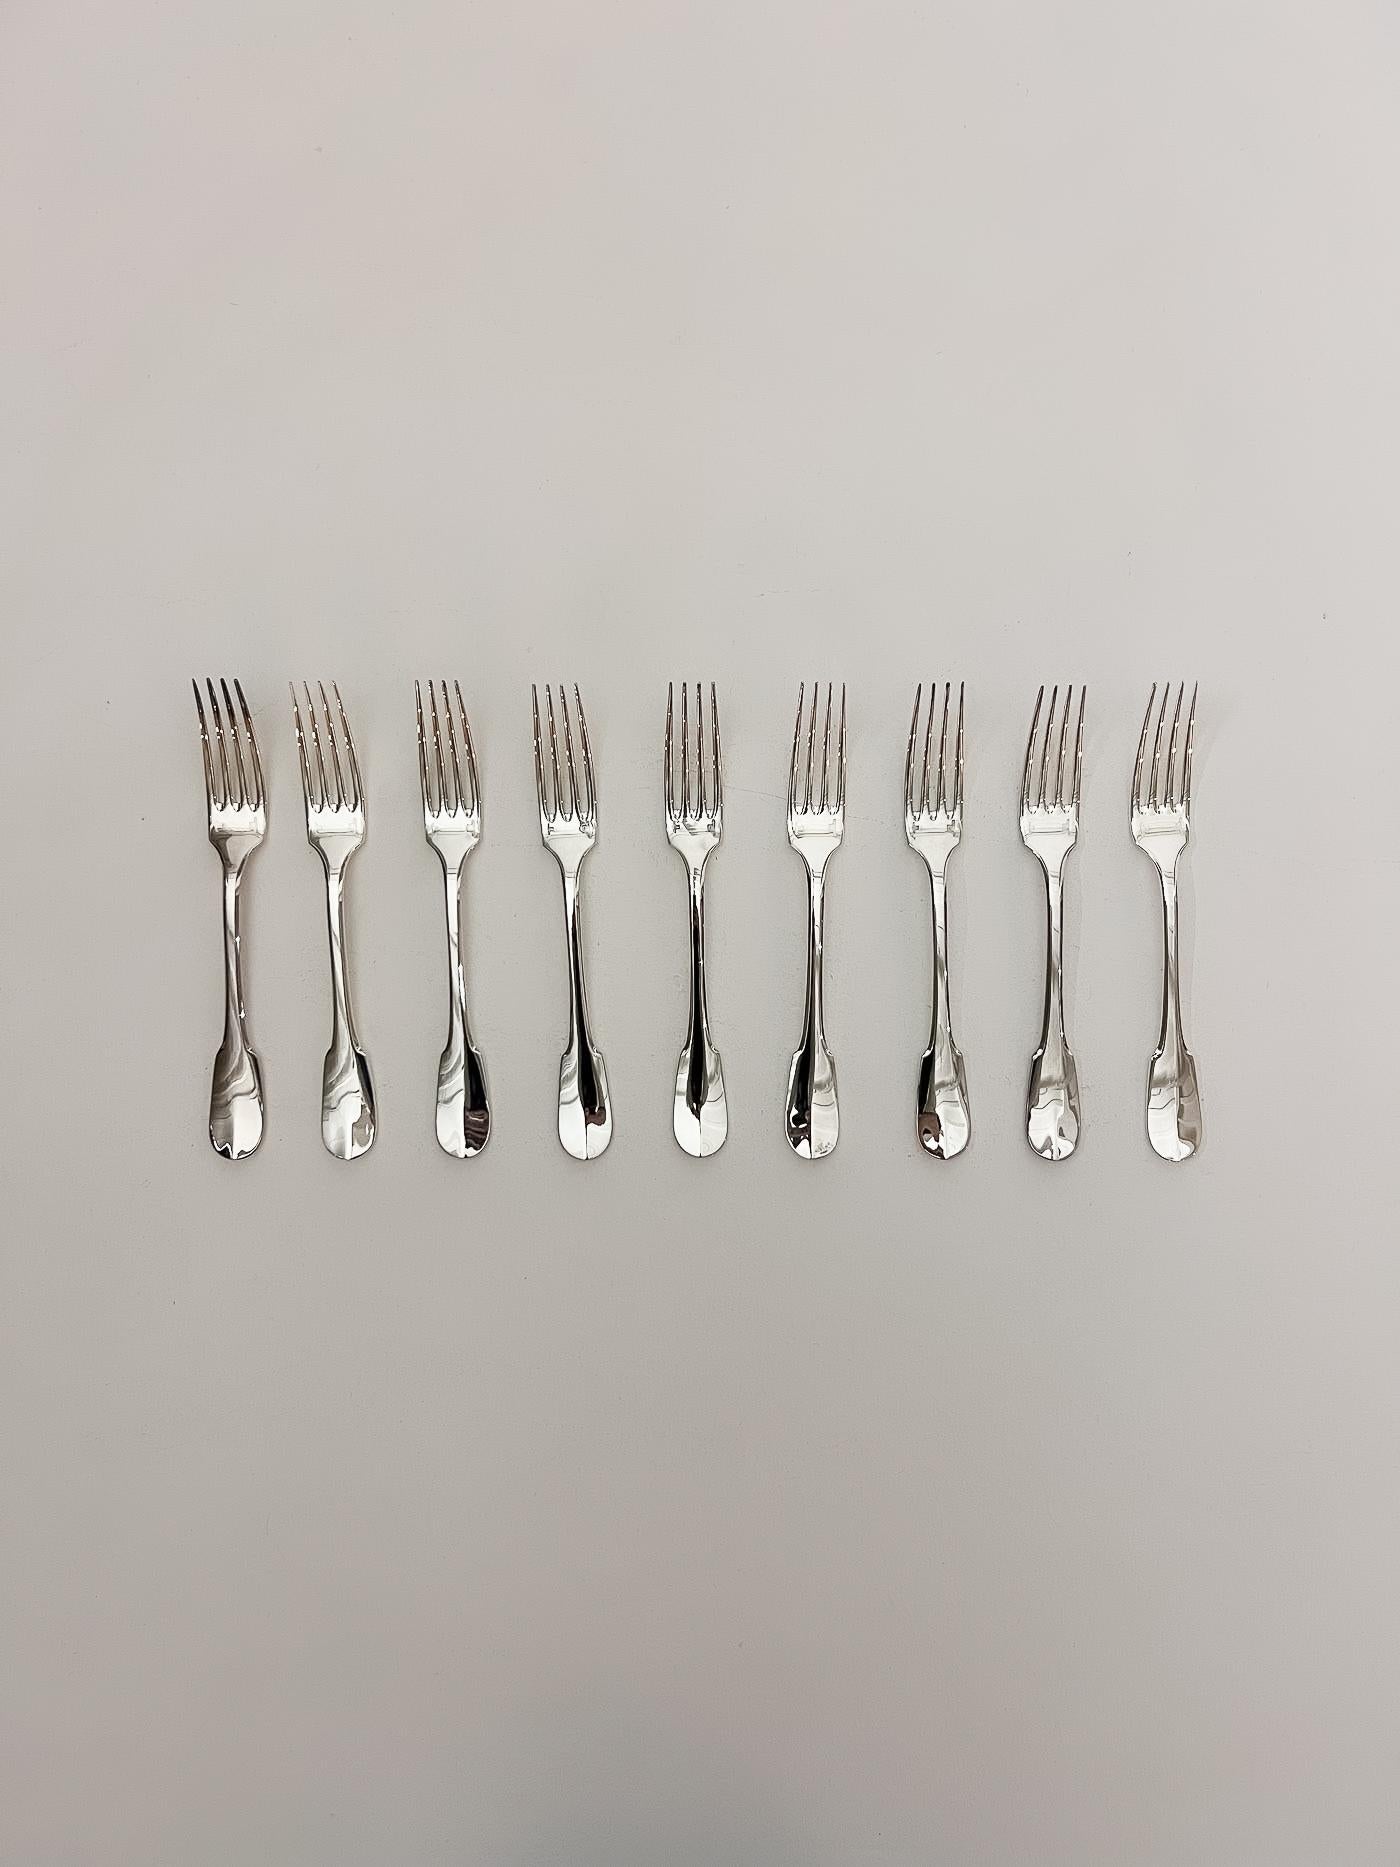 Christofle Cluny silverware set, consisting of 26 pieces, including 9 soup spoons, 9 forks, 6 teaspoons, and 2 knives. The Cluny model is ornament-free to allow for personalization with initial engravings. Very good condition.
LP2191